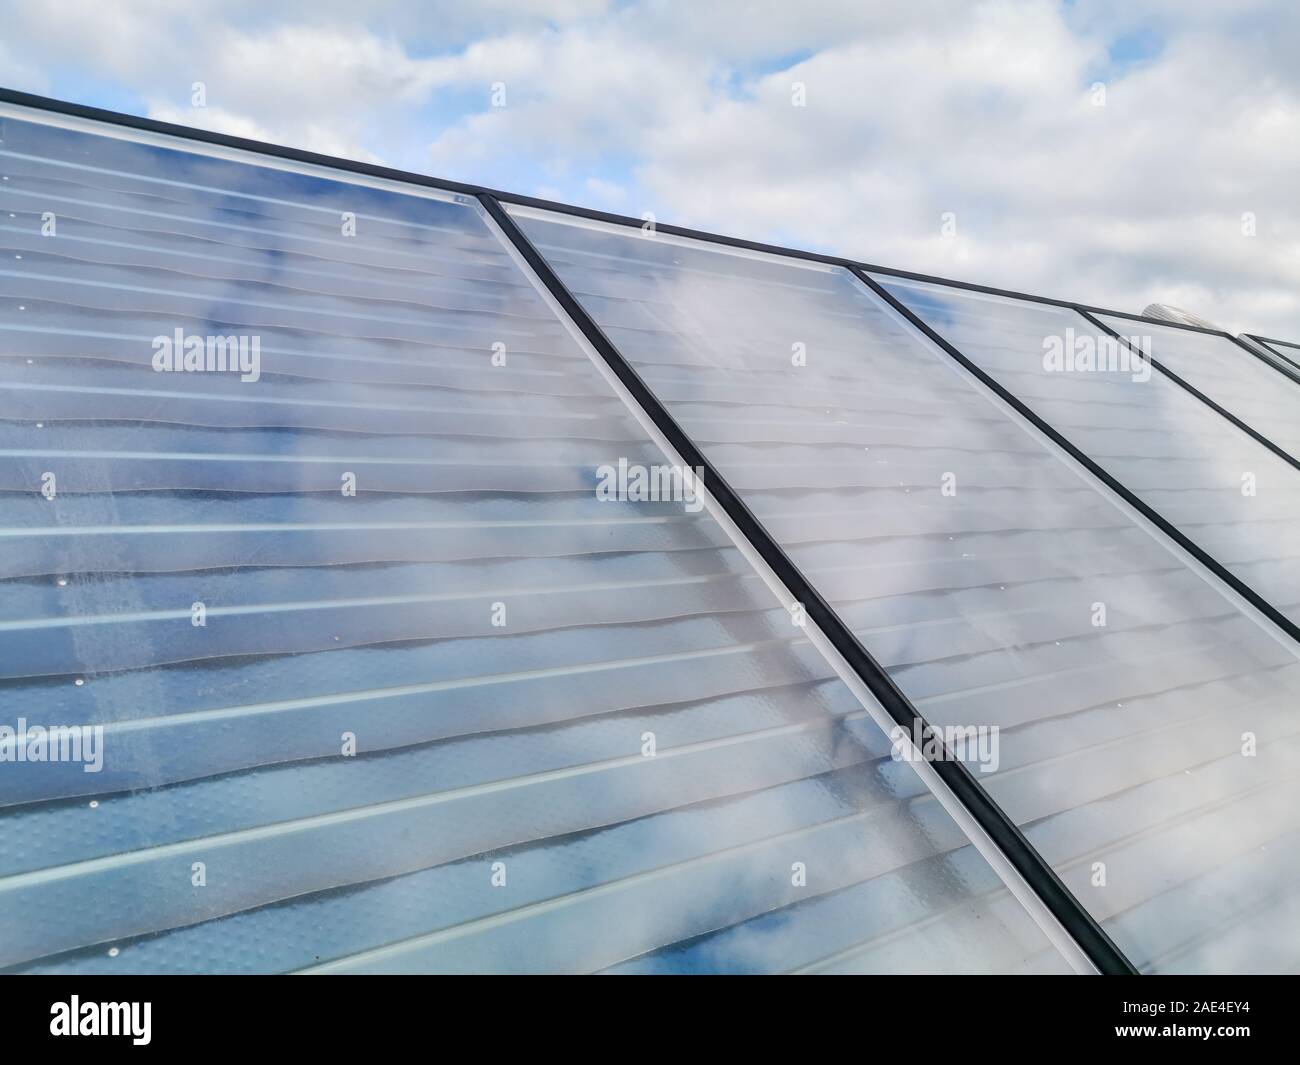 Field Photovoltaic solar production panels on a building roof Stock Photo